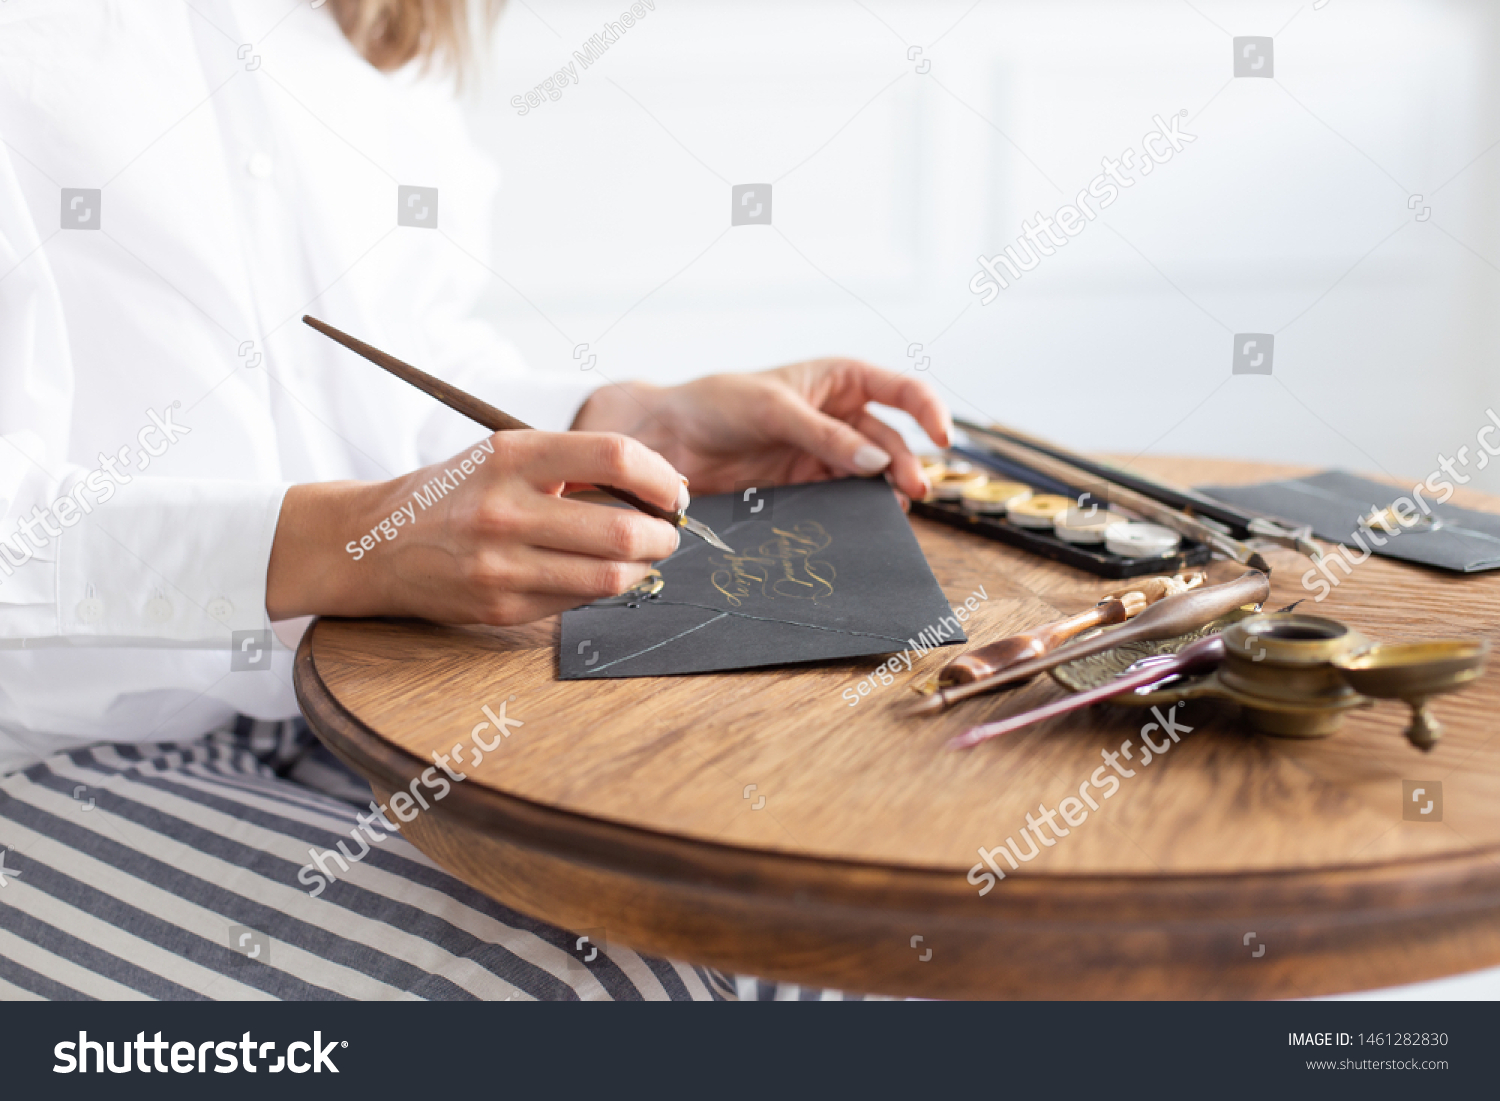 Woman calligrapher is holding a pen with ink and signs a card in handwritten font. Close-up. Soft focus. #1461282830